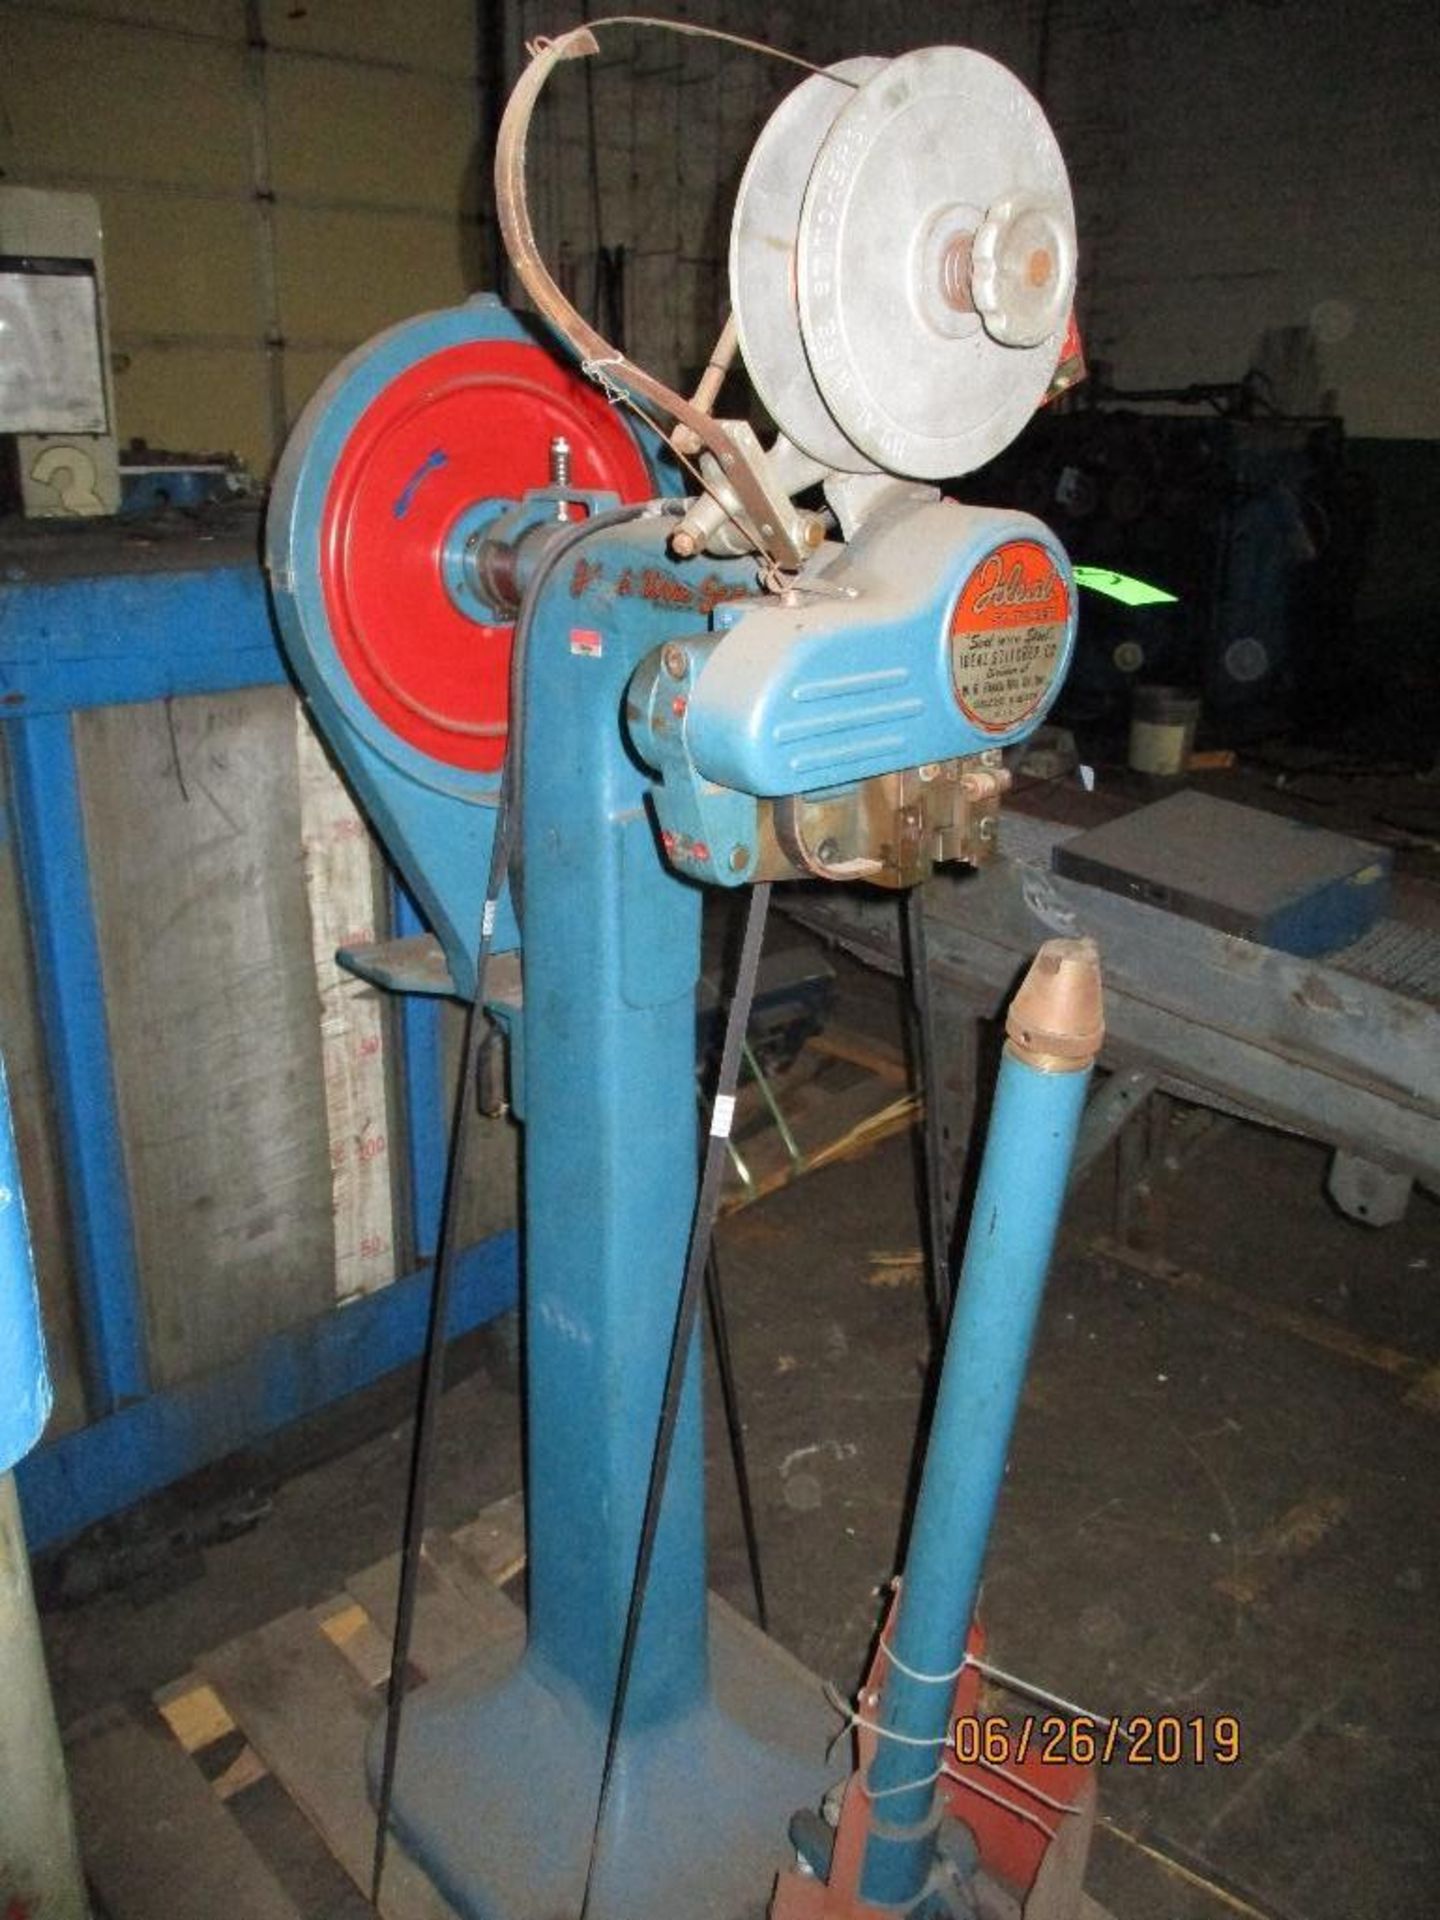 Ideal Stitcher Machine M/N IB-1240 S/N A-25546, Missing Motor, Located at 800 West Broadway St. Thre - Image 2 of 3